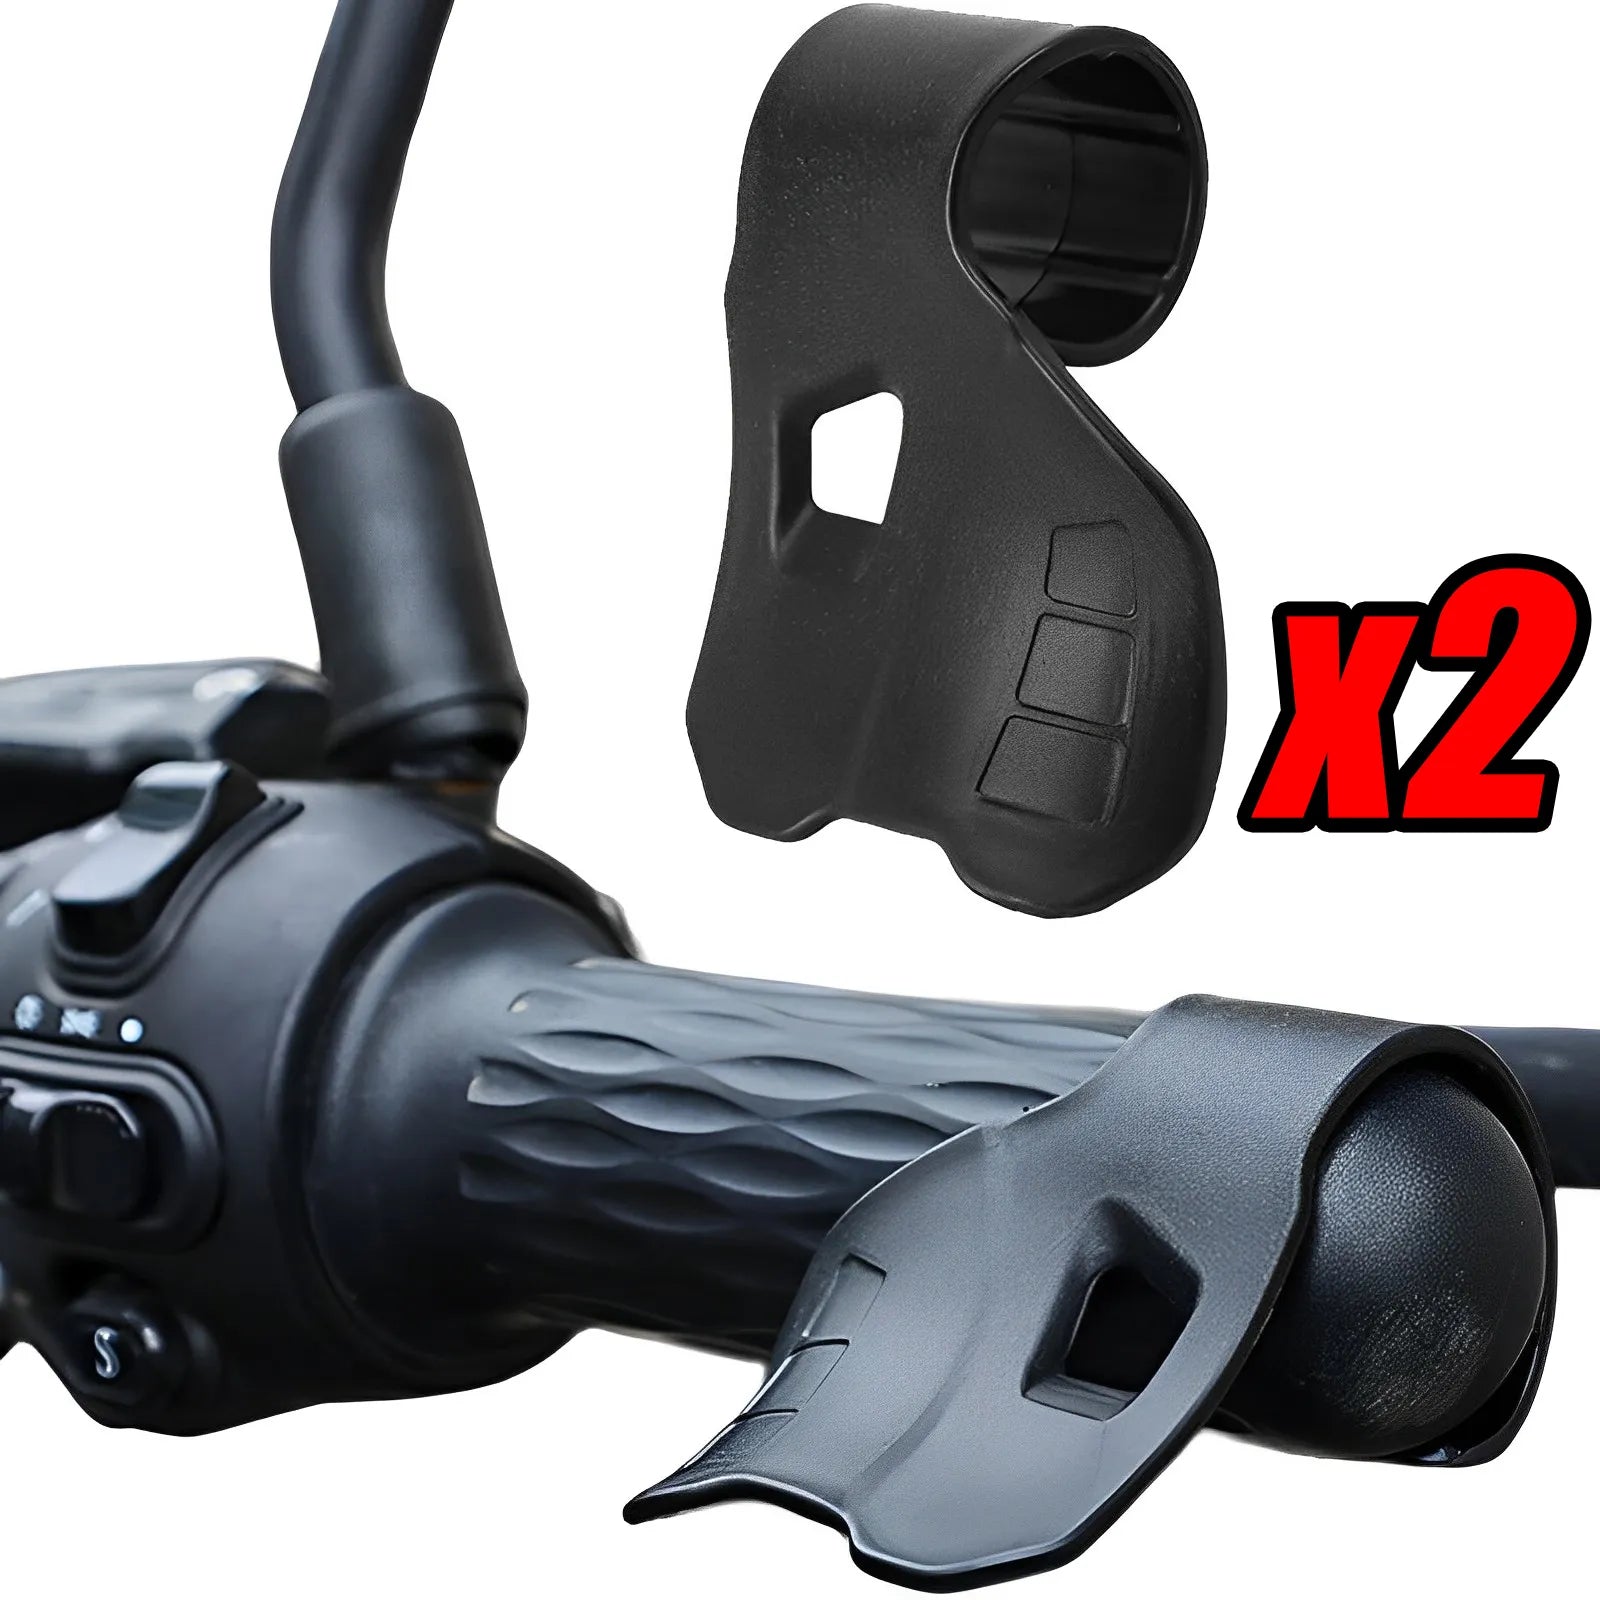 Motorcycle Grip Handlebar Bracket Non-Slip Assist Control Throttle Clip Accelerator Labor Saver Hand Grip Motorcycle Accessories